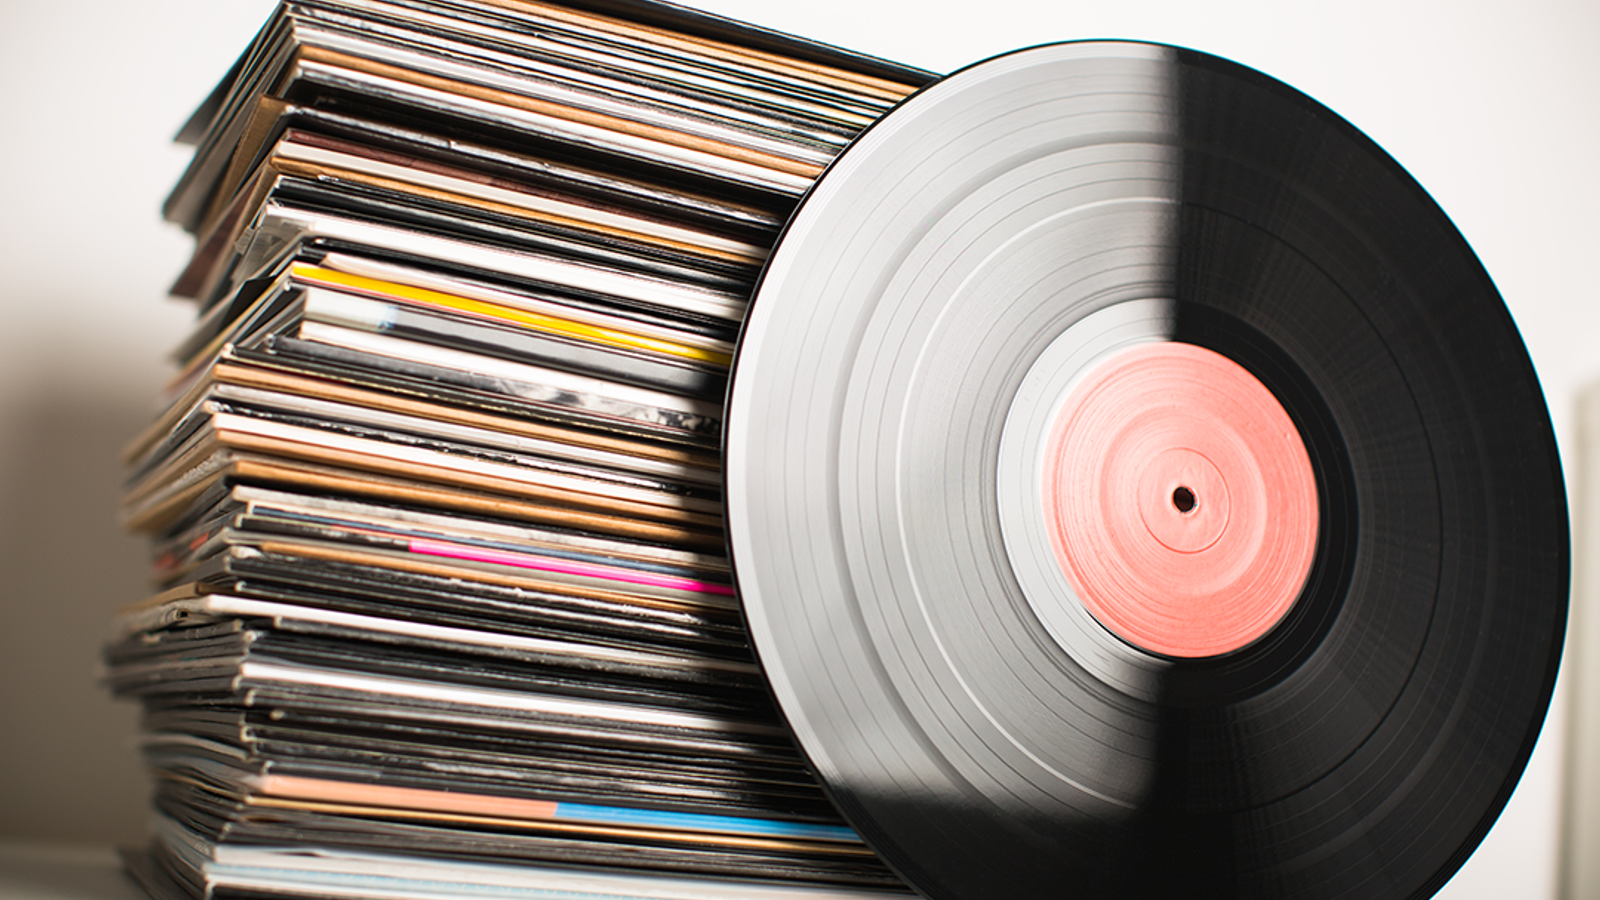 Vinyl sales overtake CDs for the first time in 35 years - and the